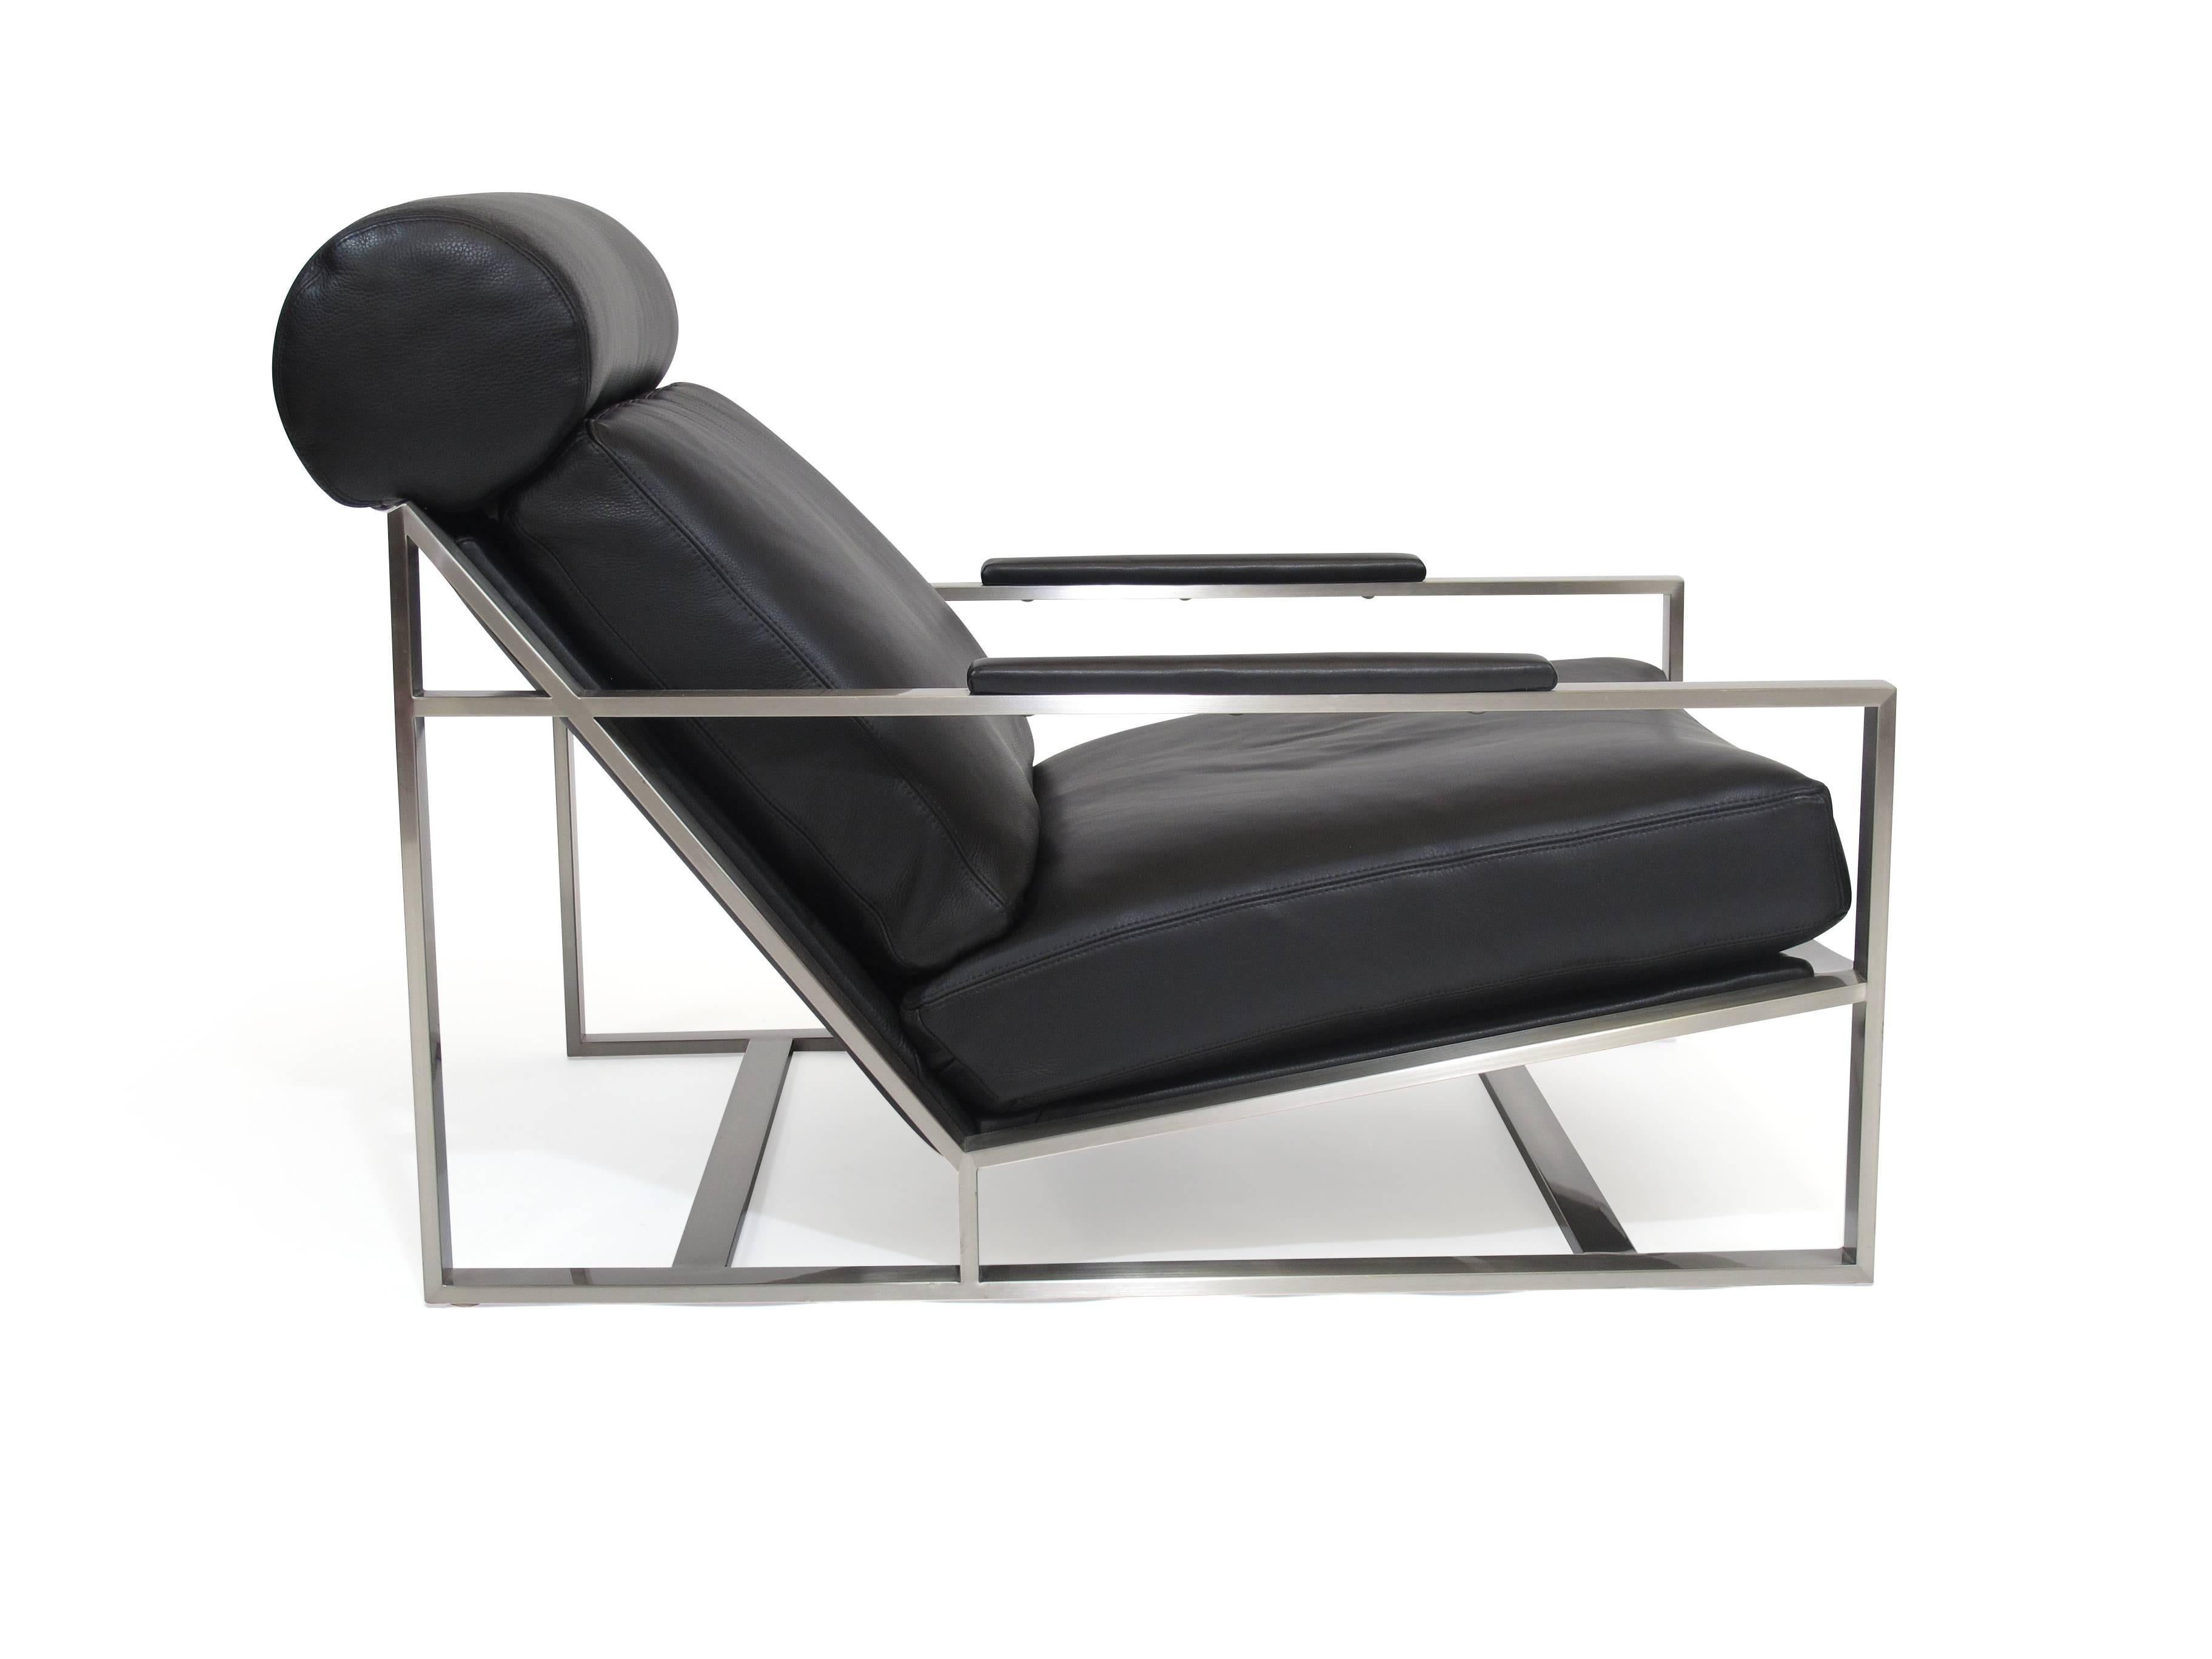 Lounge chair designed by Milo Baughman for Thayer Coggin, circa 1965.
Low, comfortable lounge chair with reclined back and head cushion, upholstered in fine black leather with double top-stitching on a brushed stainless steel frame. Label. Ottoman: